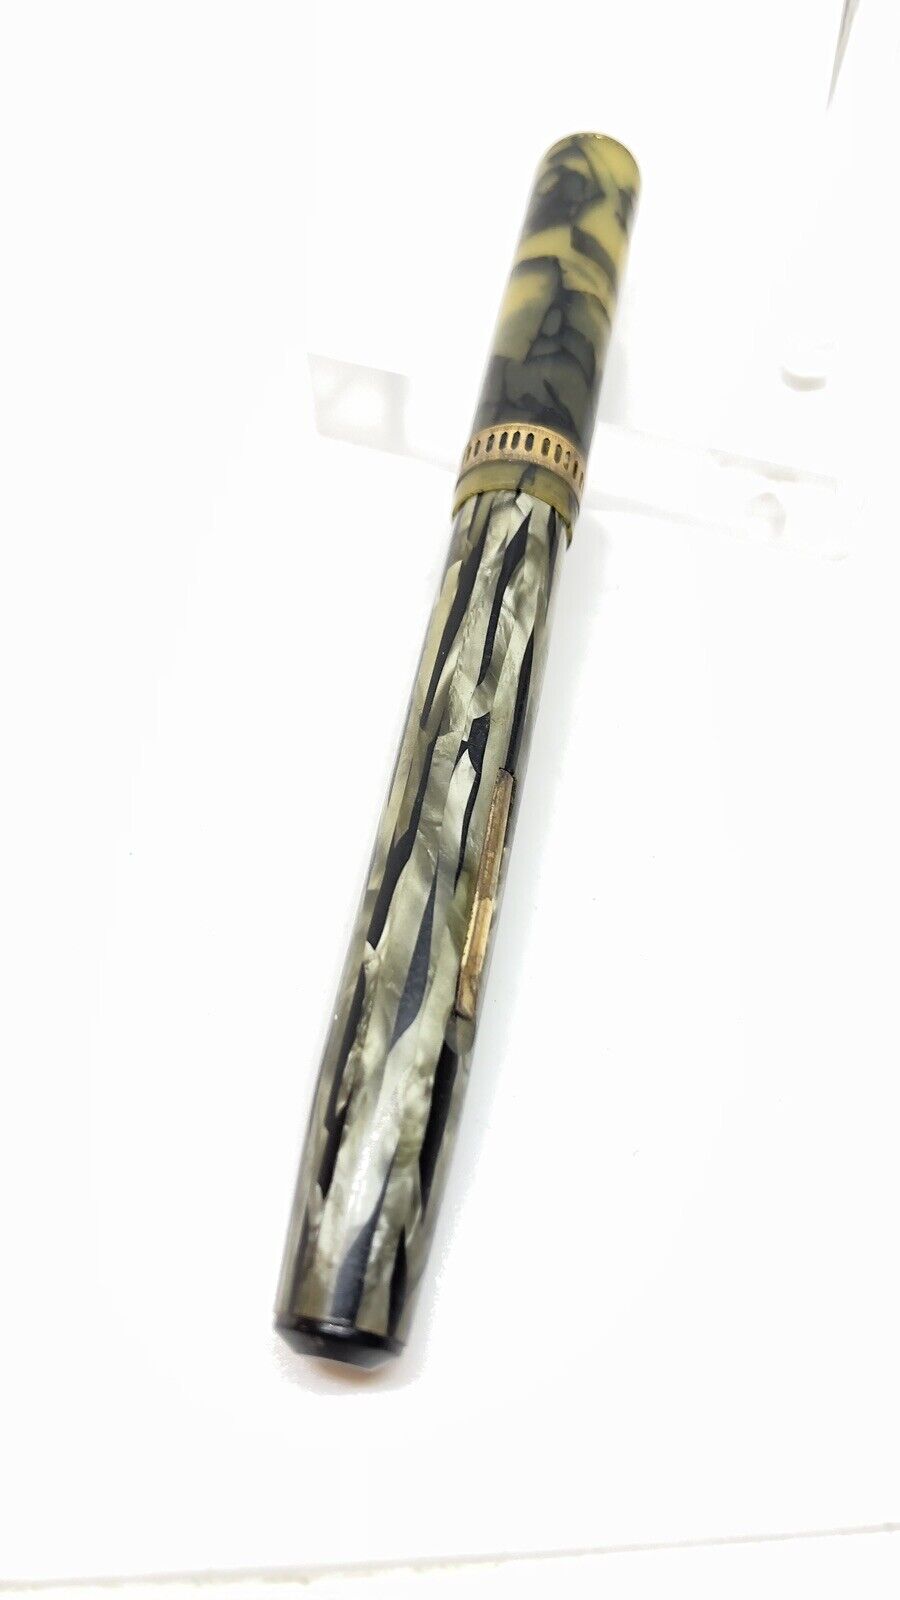 Vintage Epenco Green Marbled Fountain Pen Miss-matched Cap